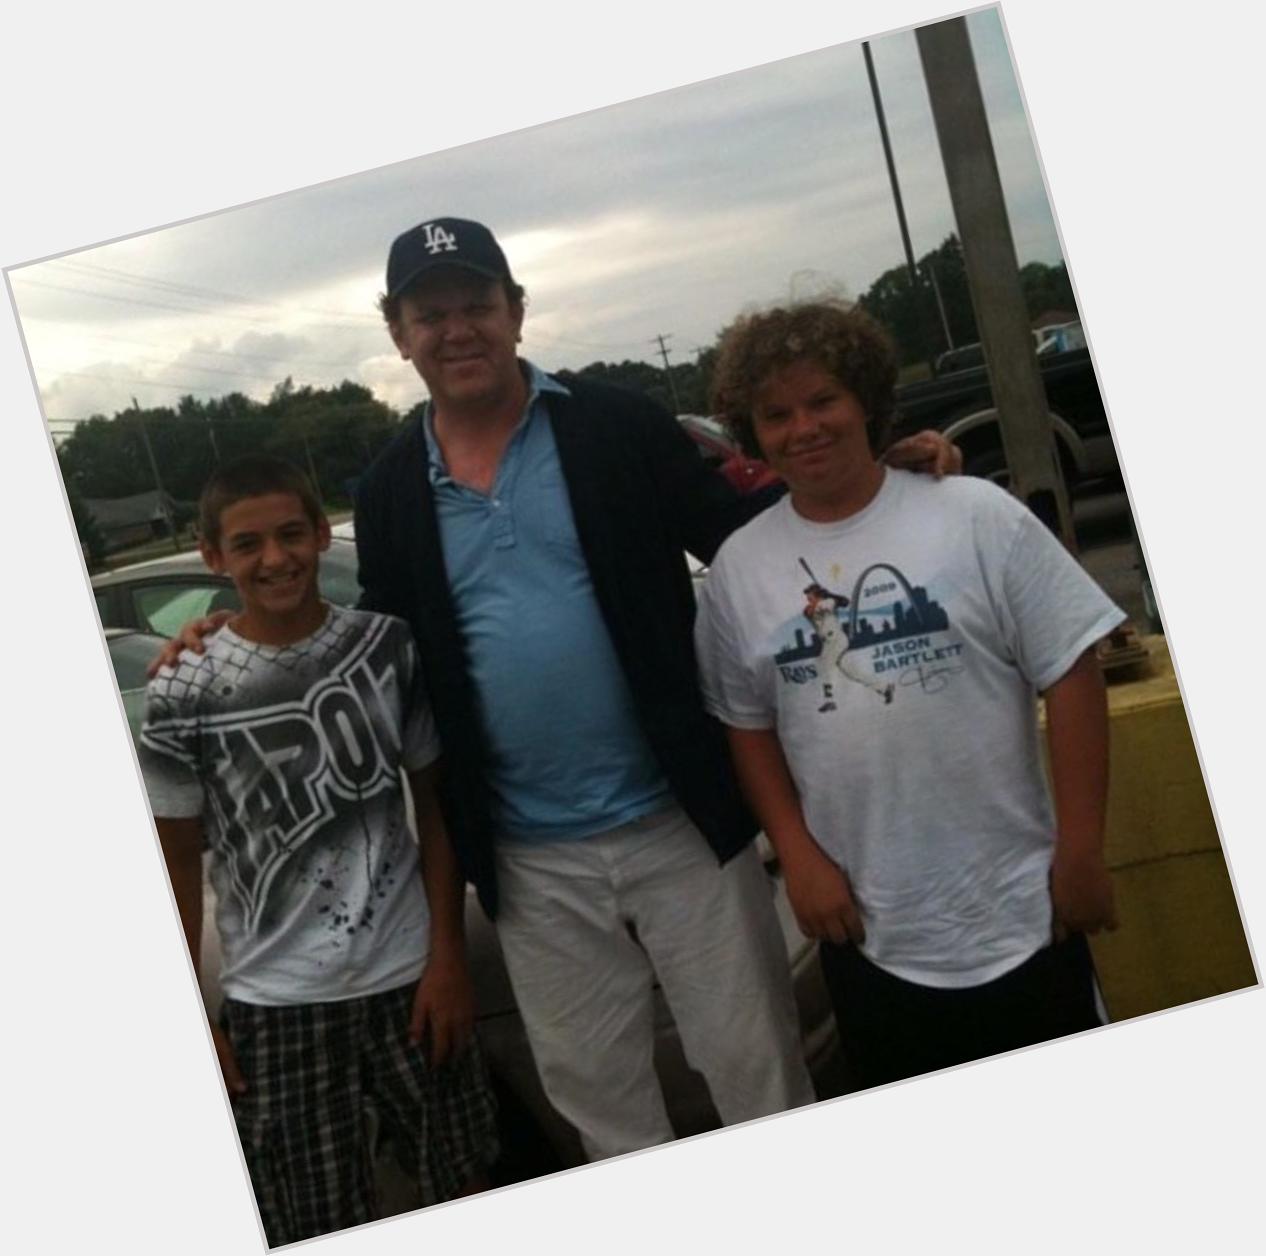 I\d like to wish a happy 2 0 th birthday to my cousin So here is us with John C. Reilly in Michigan   